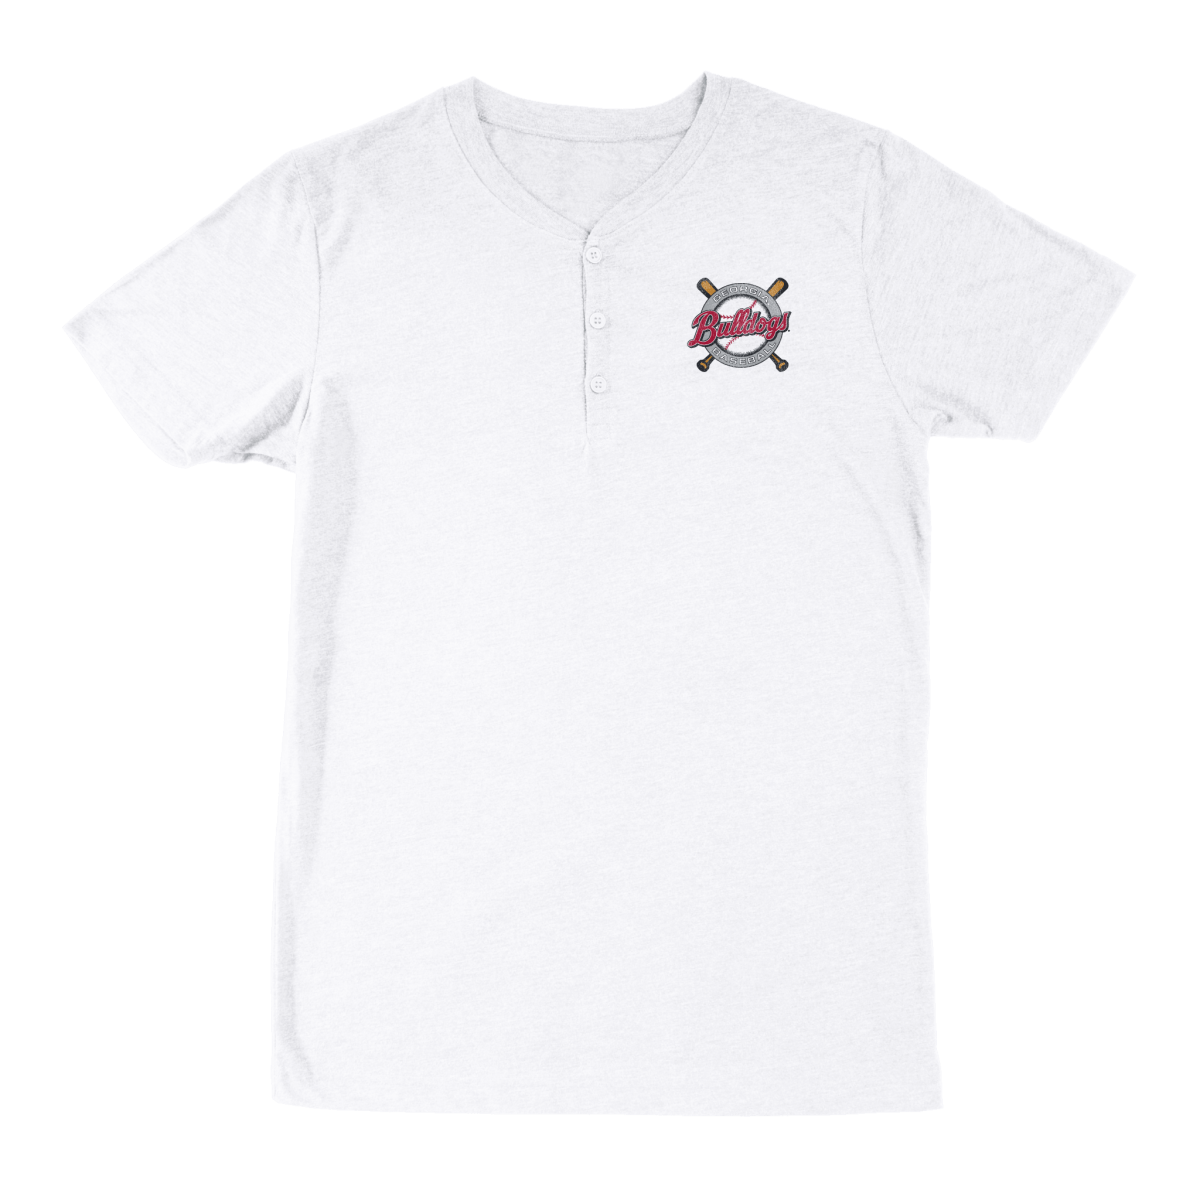 Georgia Swing for the Fences Henley - Shop B-Unlimited